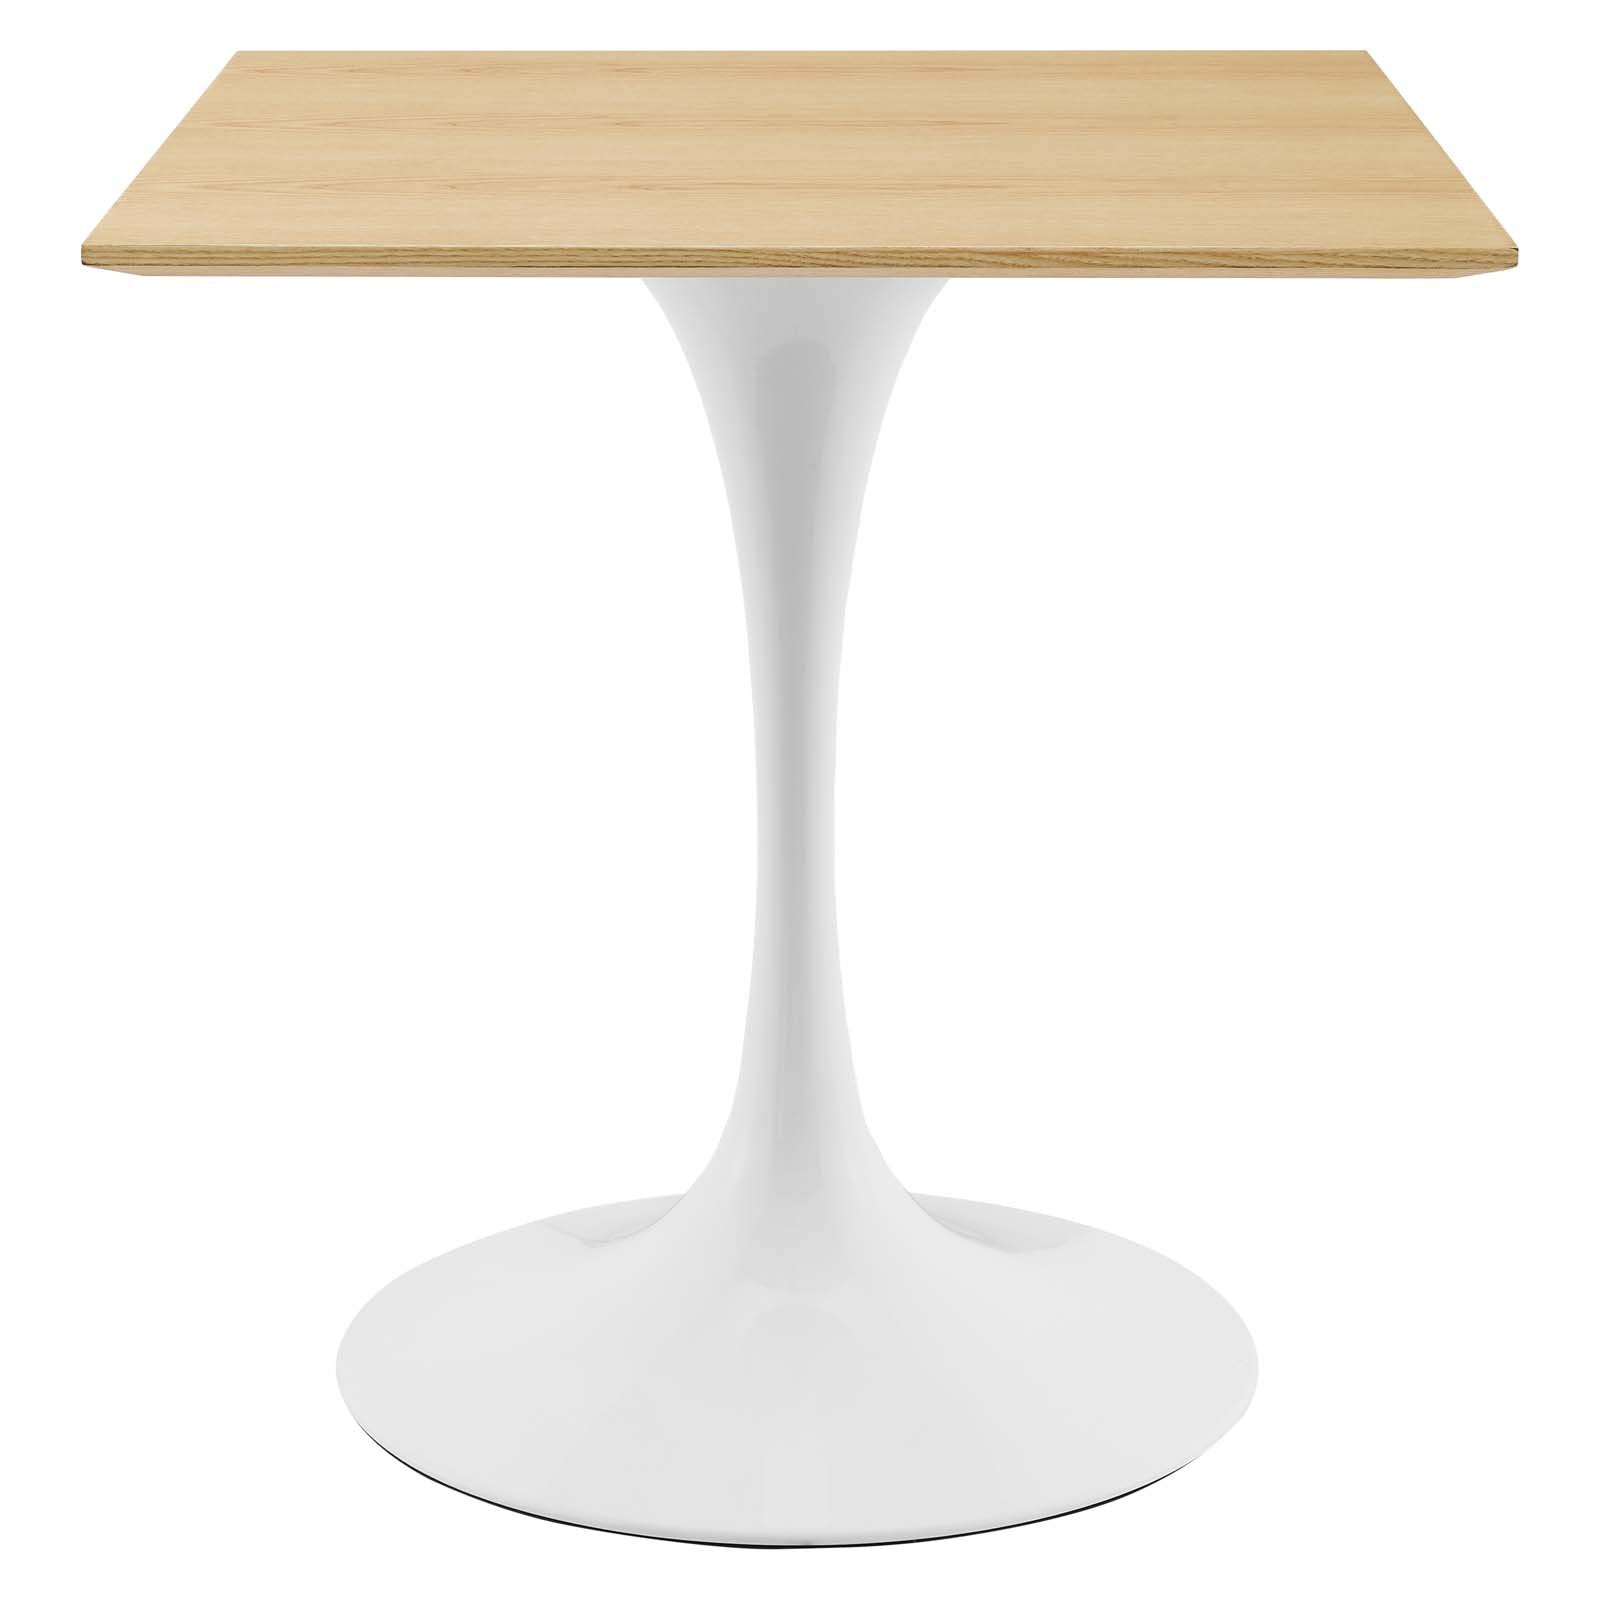 Lippa 28" Square Dining Table